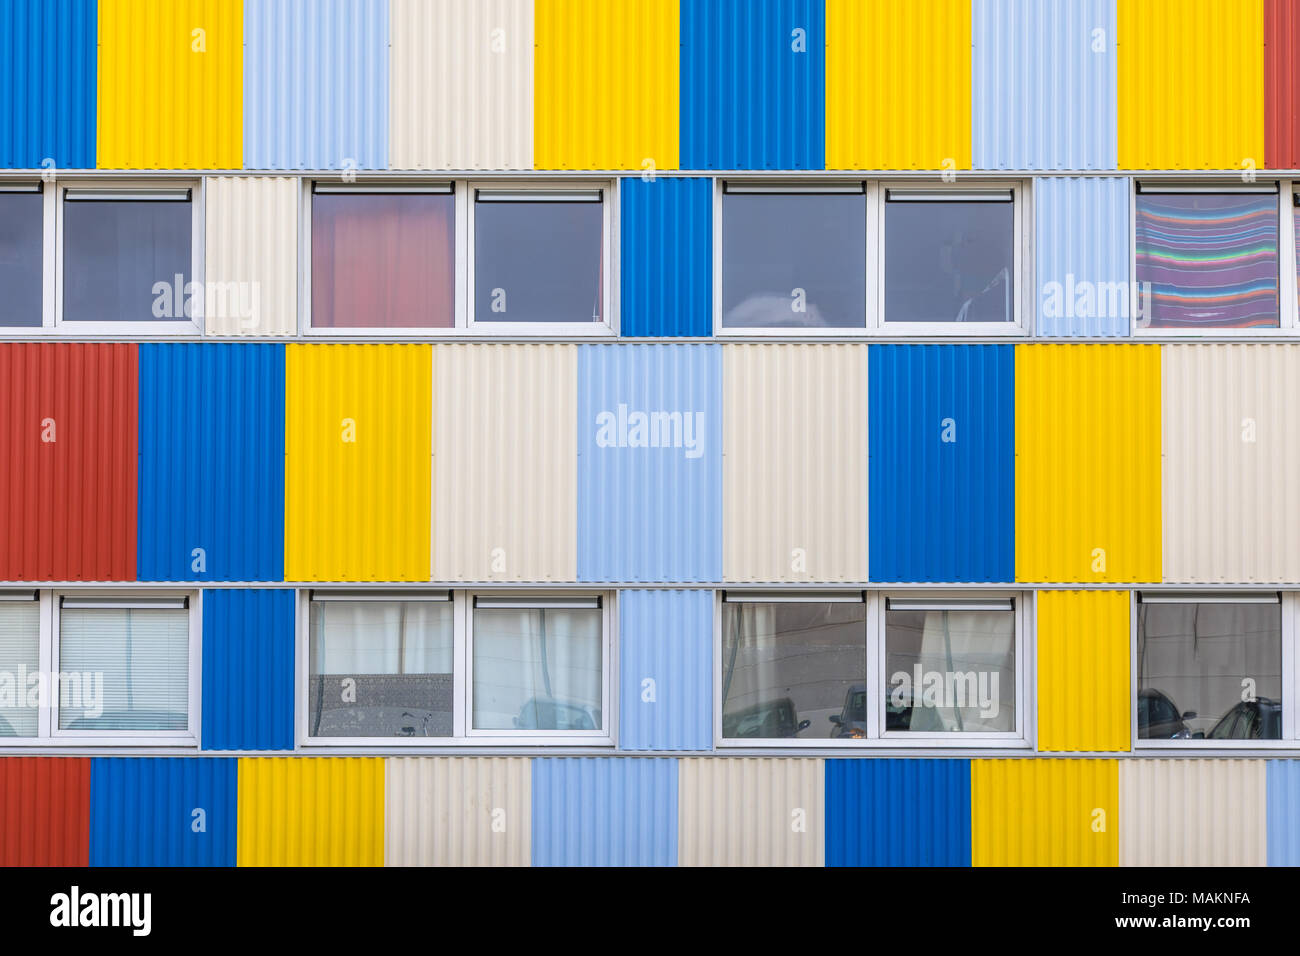 Windows of Student housing in shipping containers painted in pright colors with bicycle parking in the foreground Stock Photo